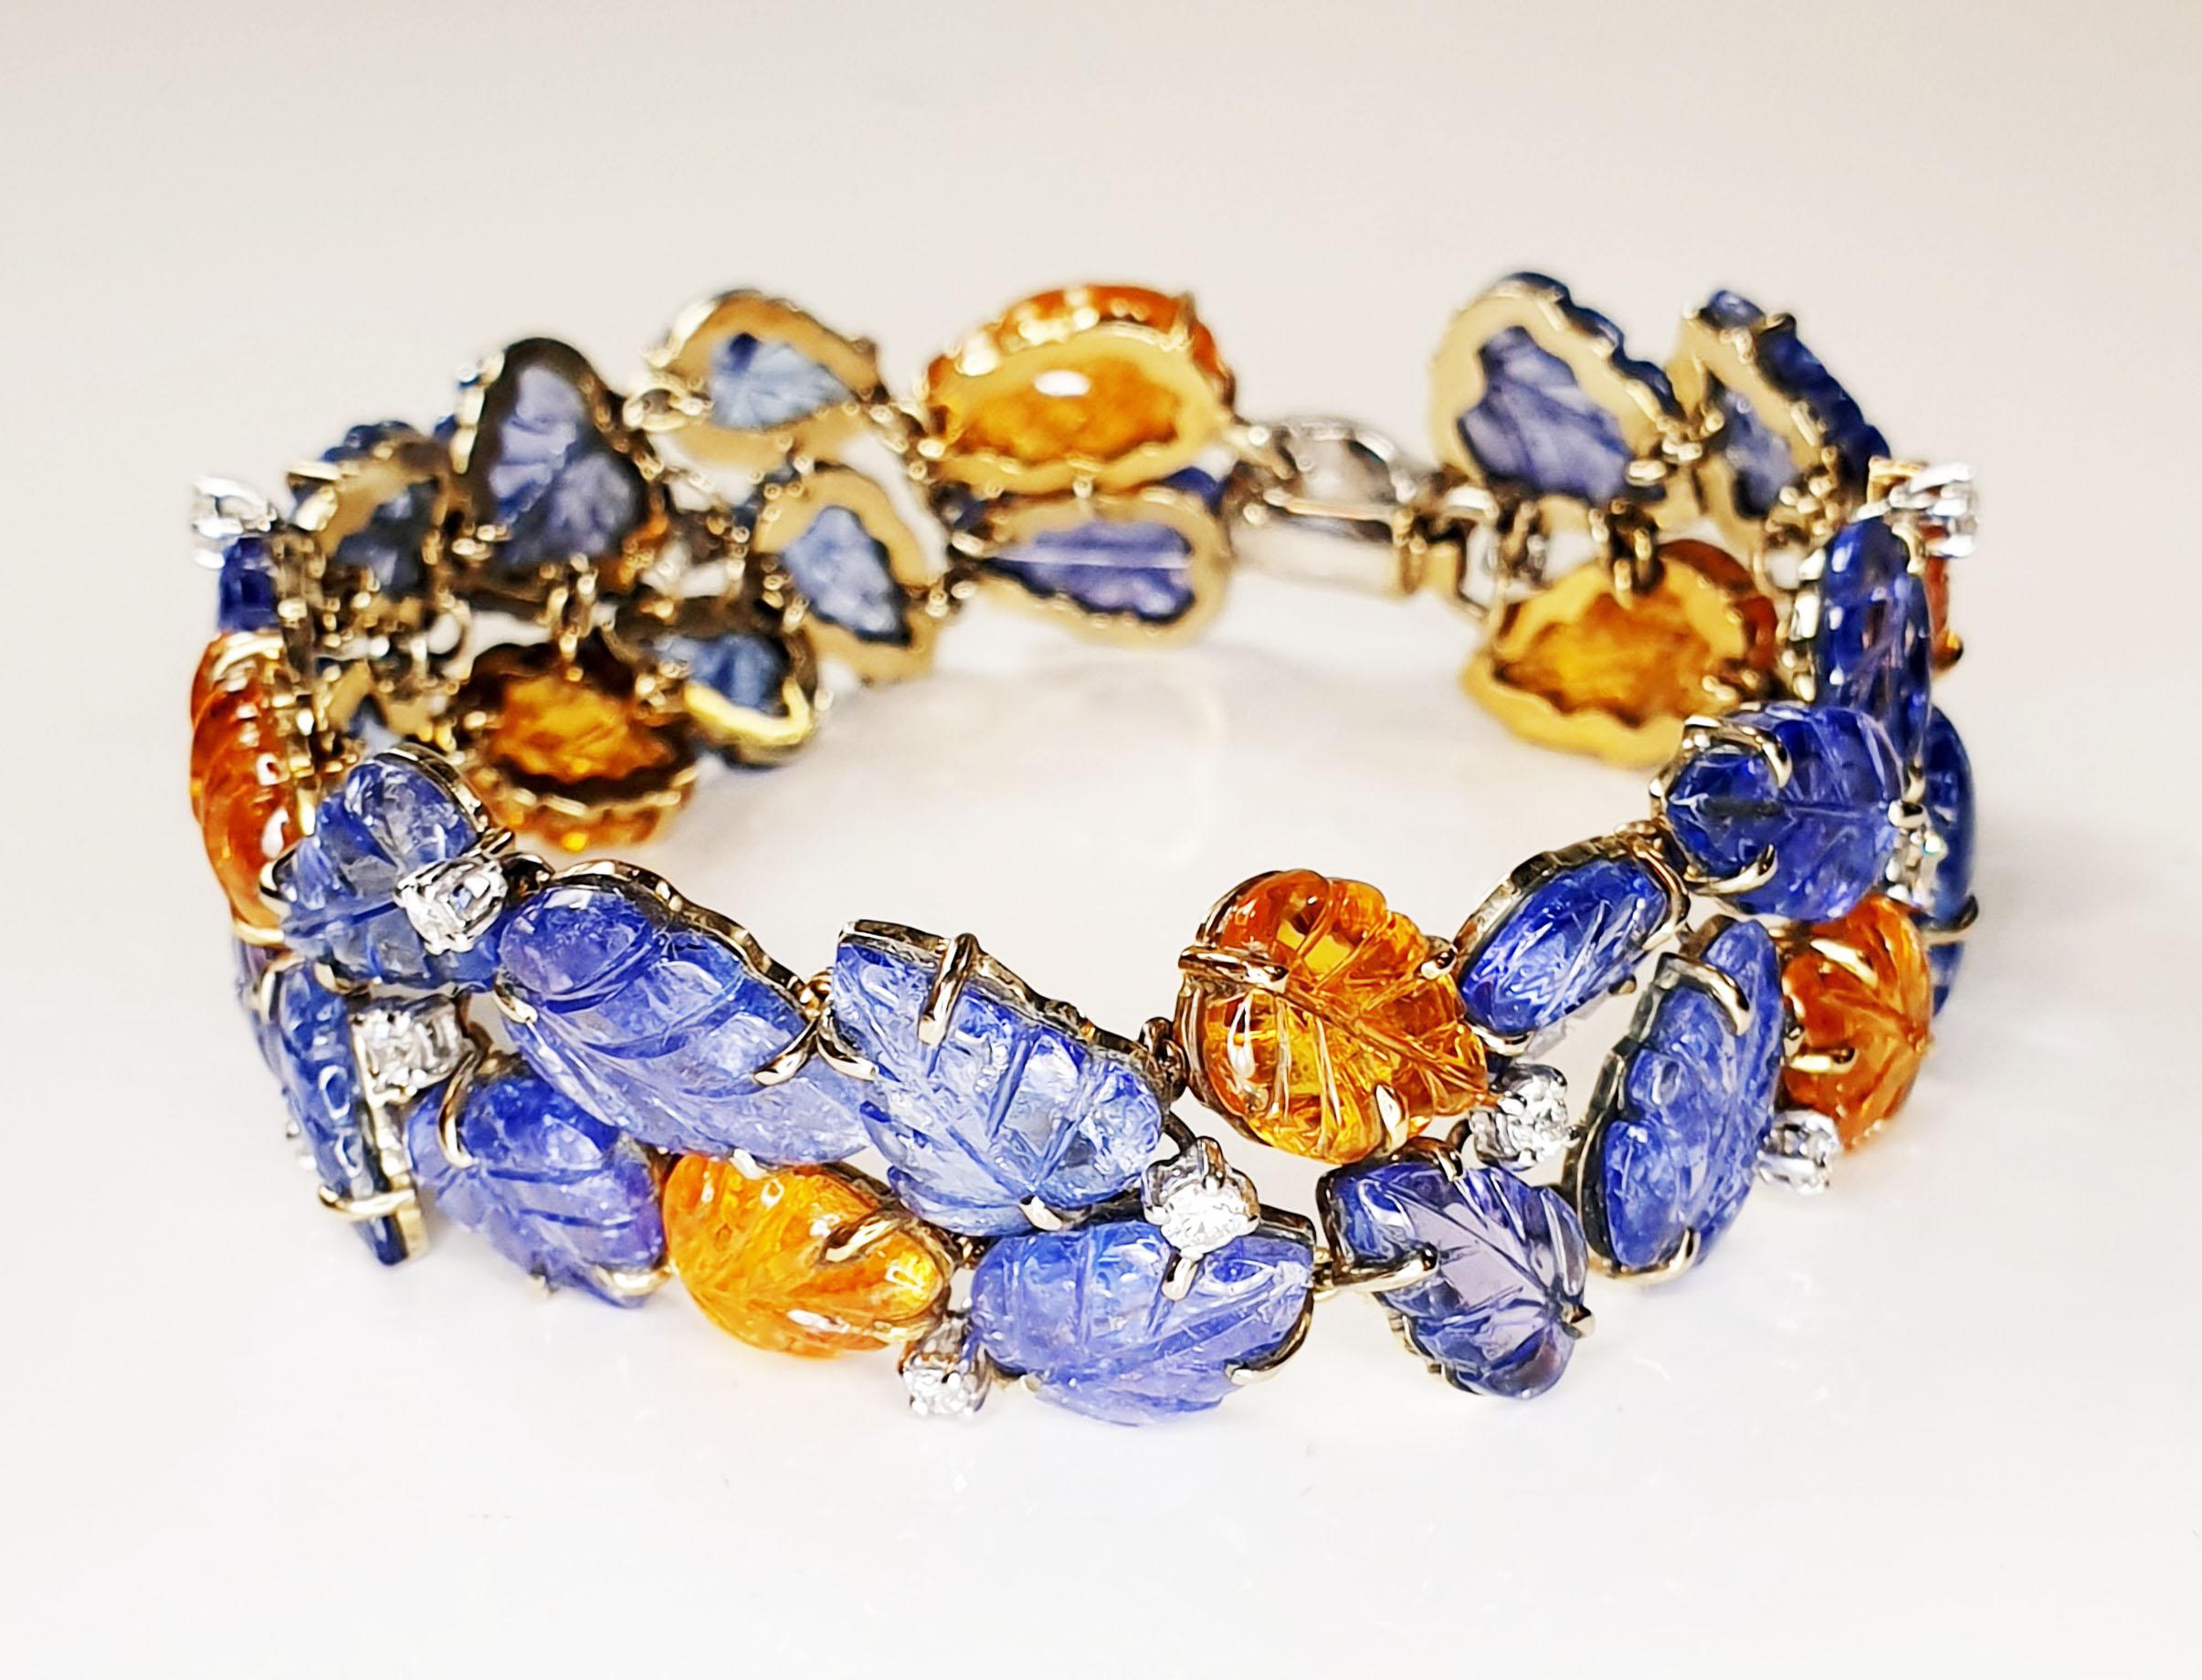 Diamonds Tanzanite and spessartite garnet carved leafs clutch bracelet in 18k yellow and white gold
Irama Pradera is a Young designer from Spain that searches always for the best gems and combines classic with contemporary mounting and styles. 
This